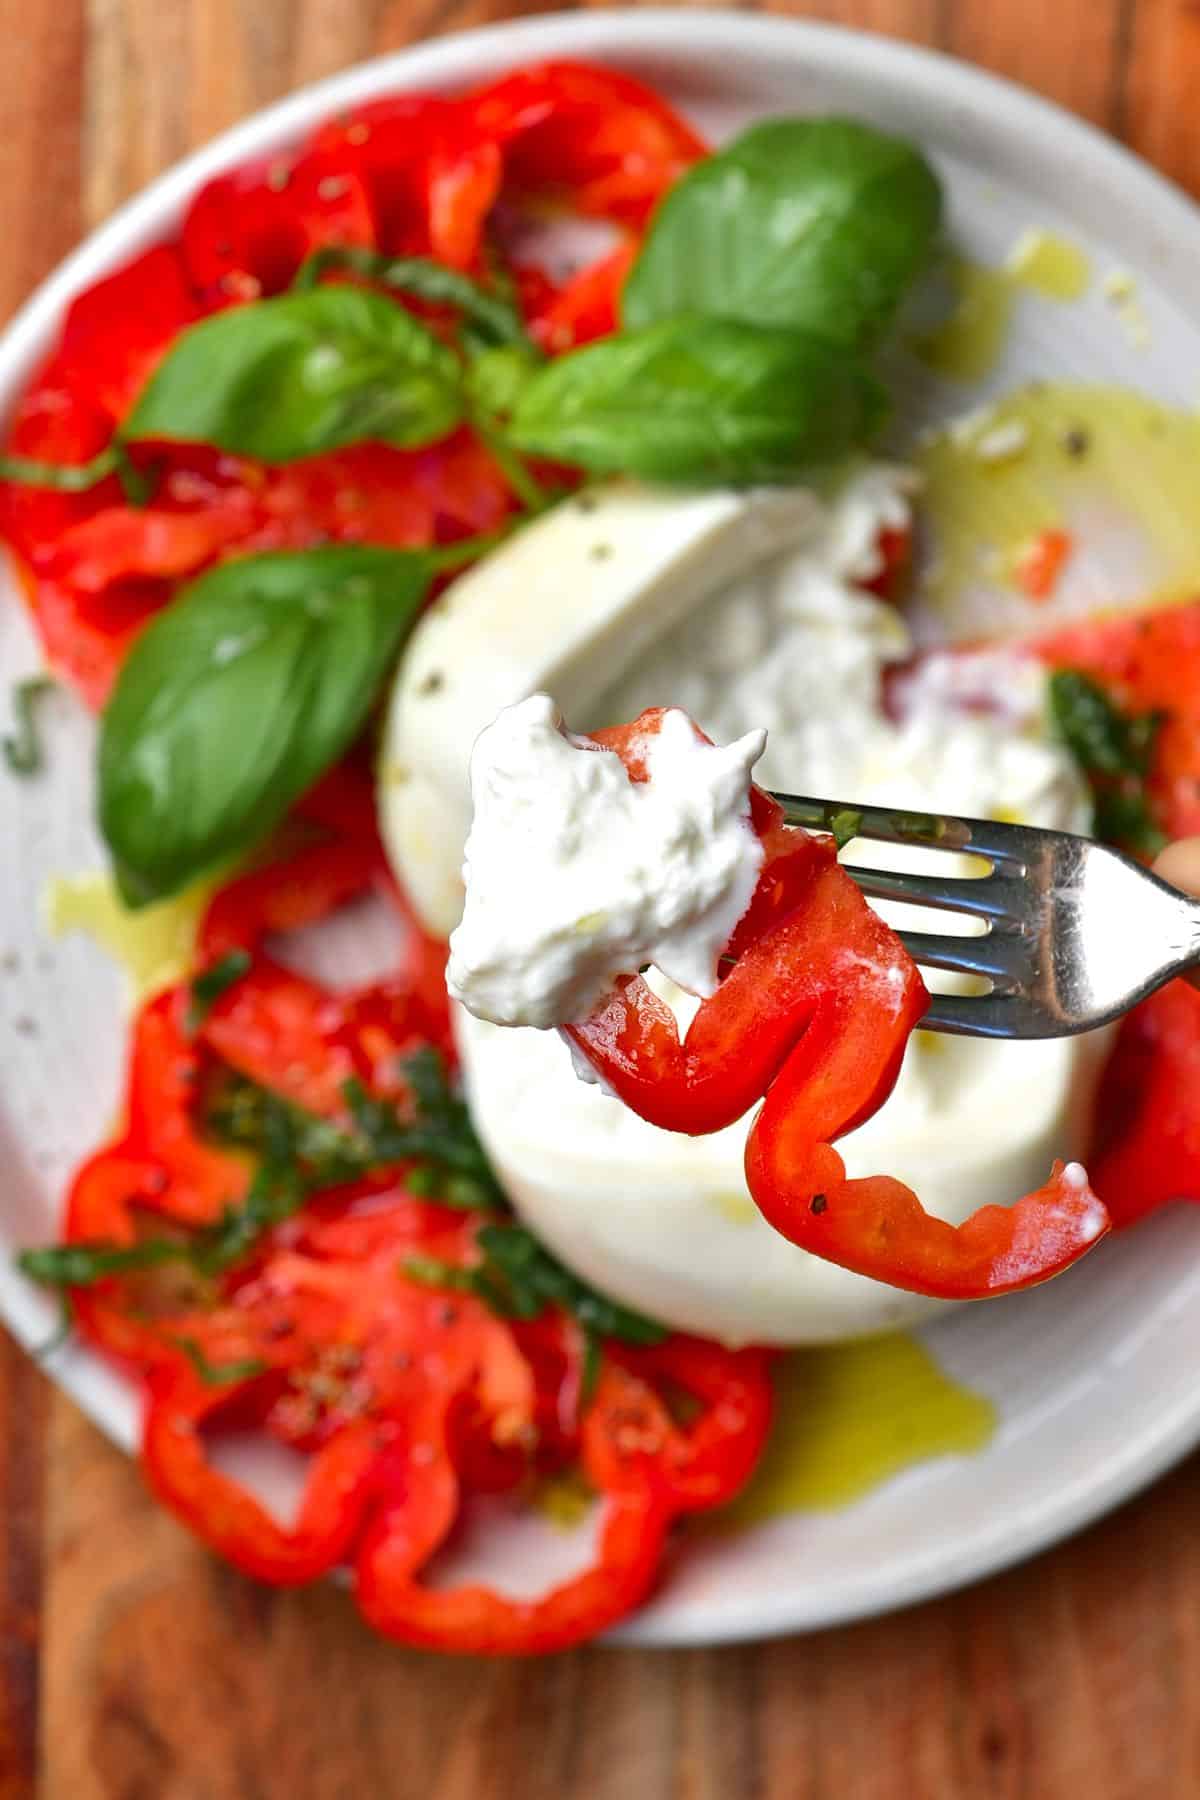 Sliced tomatoes and burrata cheese on a plate